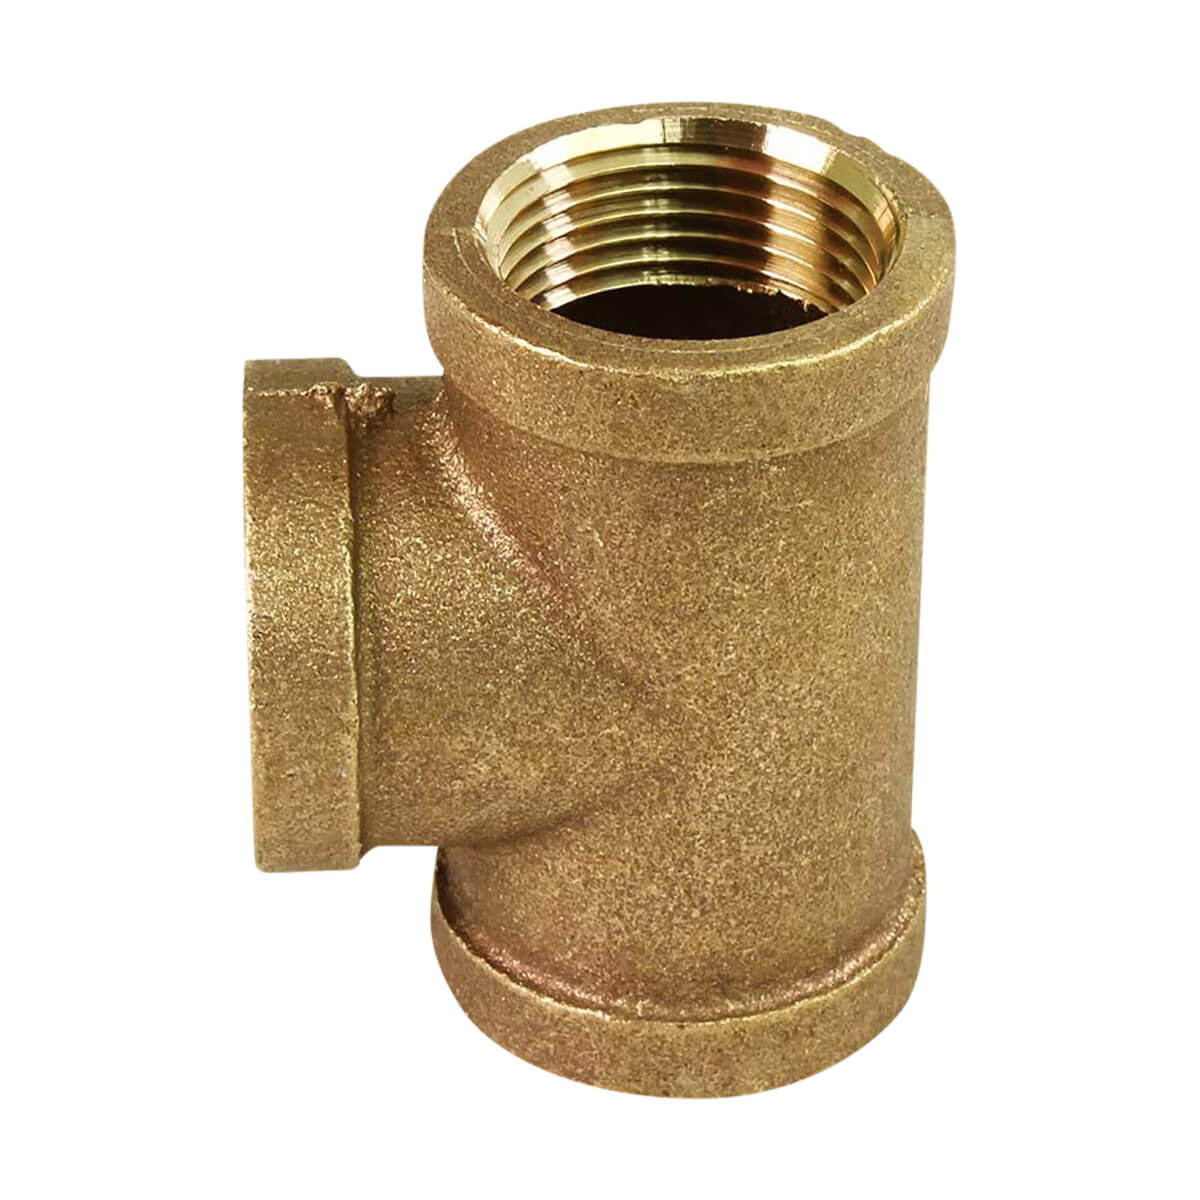 Brass Tee Coupling - 1-1/4-in